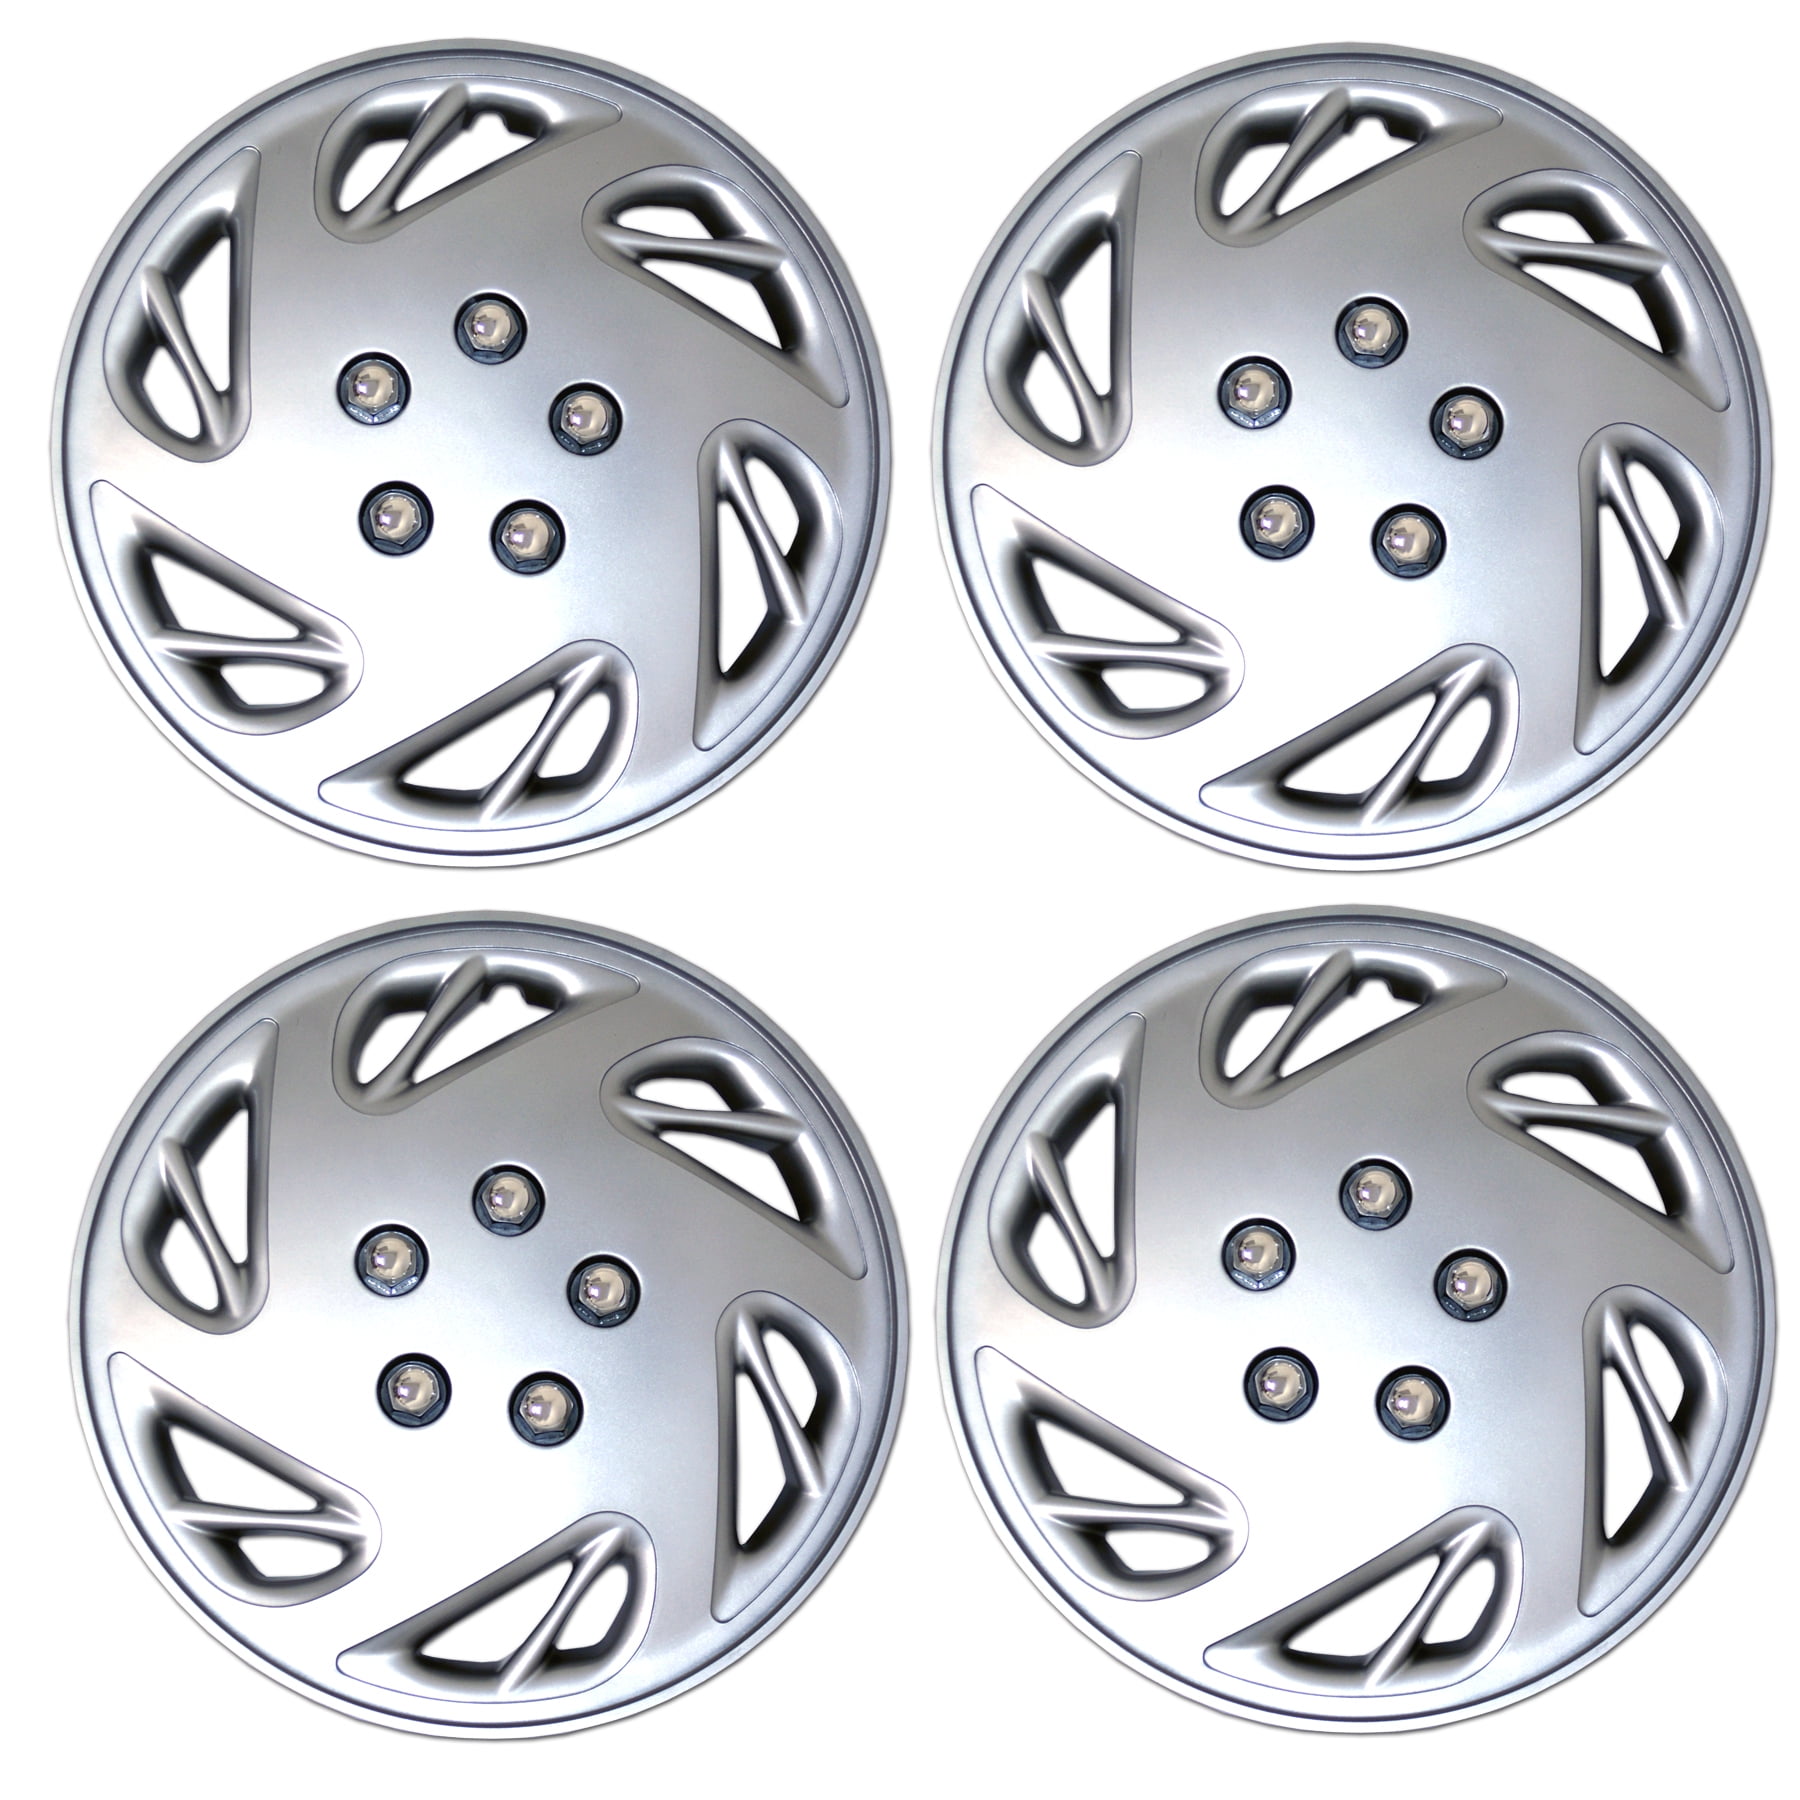 TuningPros WSC-503S15 Hubcaps Wheel Skin Cover 15-Inches Silver Set of 4 